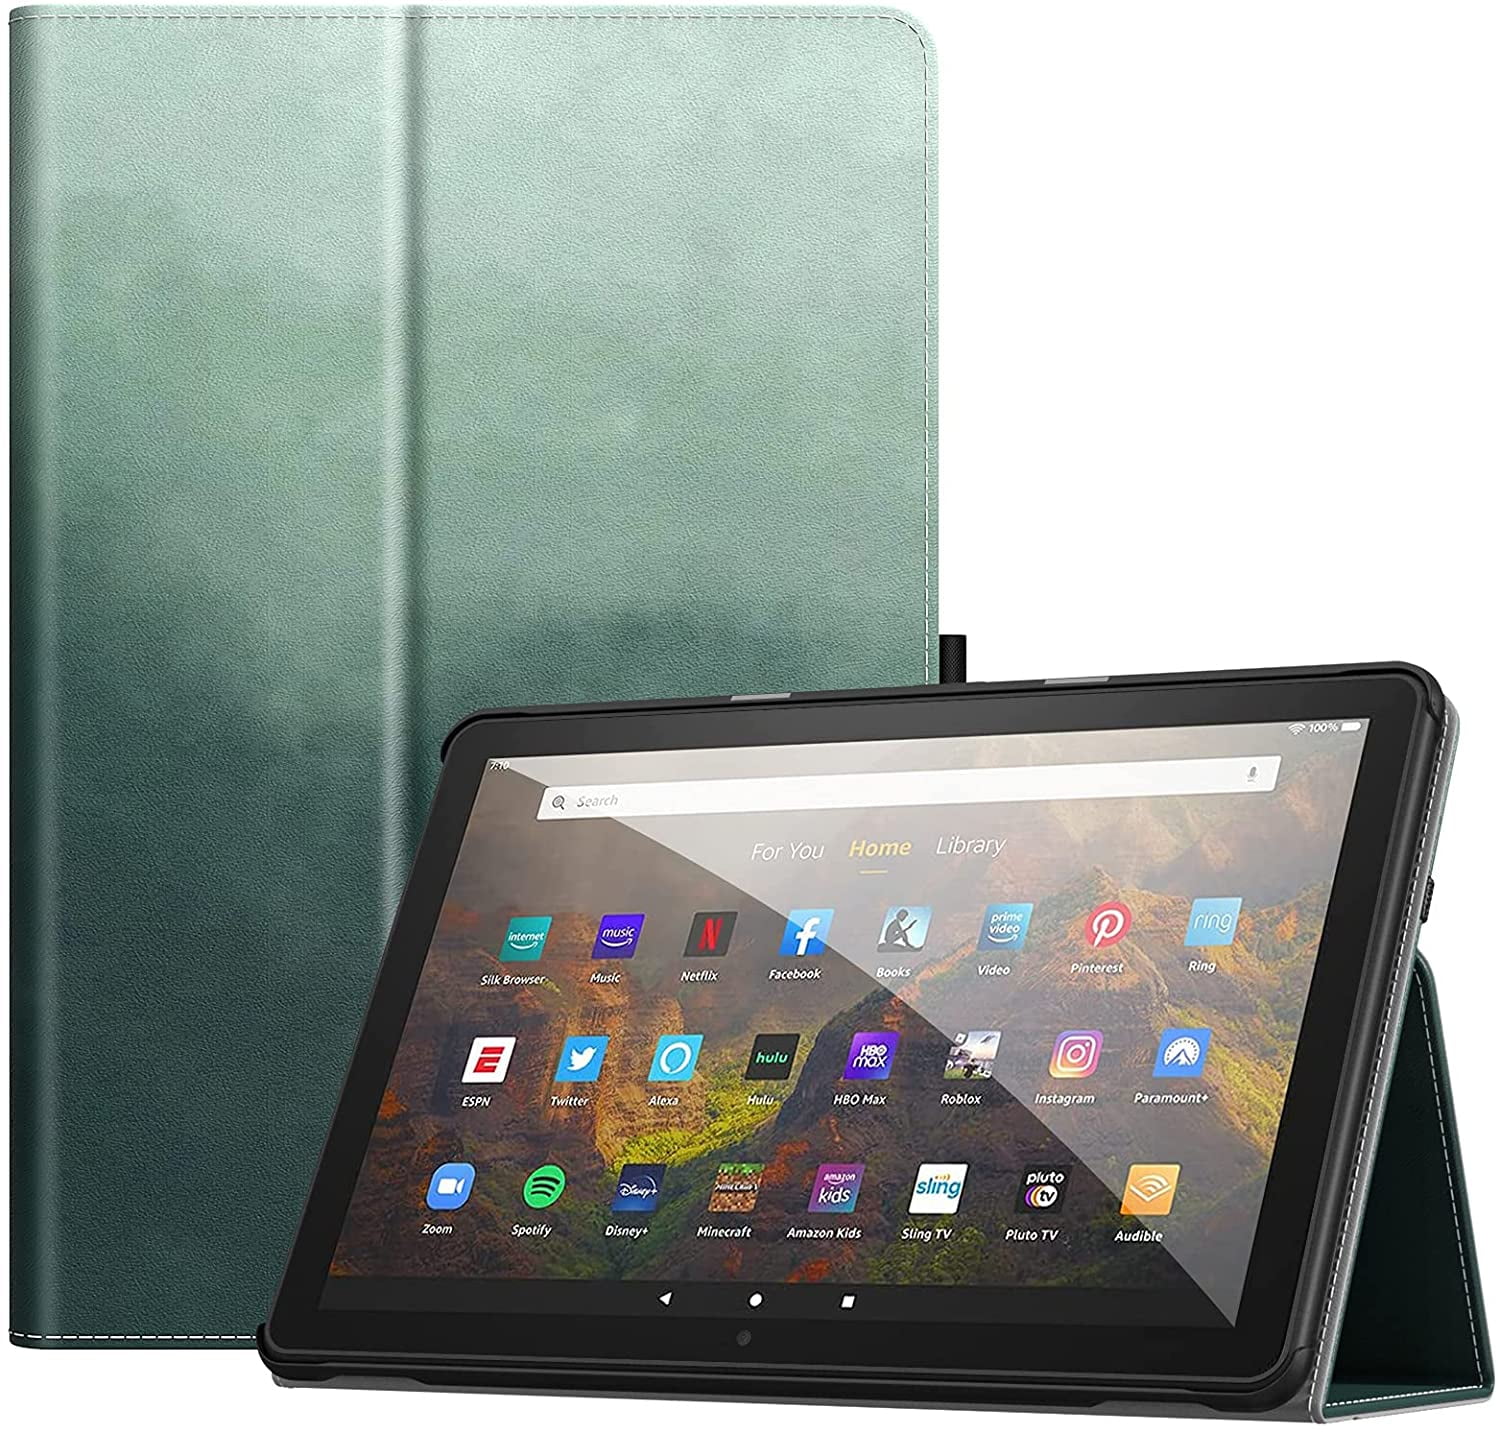 11th Generation,2021 Model Release ,Auto Sleep/Wake Multi-Angle Stand Folio Cover for  Fire HD 10 Tablet with Pocket/Card Slots,Grey Kindle Fire HD 10 Tablet Case & Fire HD 10 Plus Case 